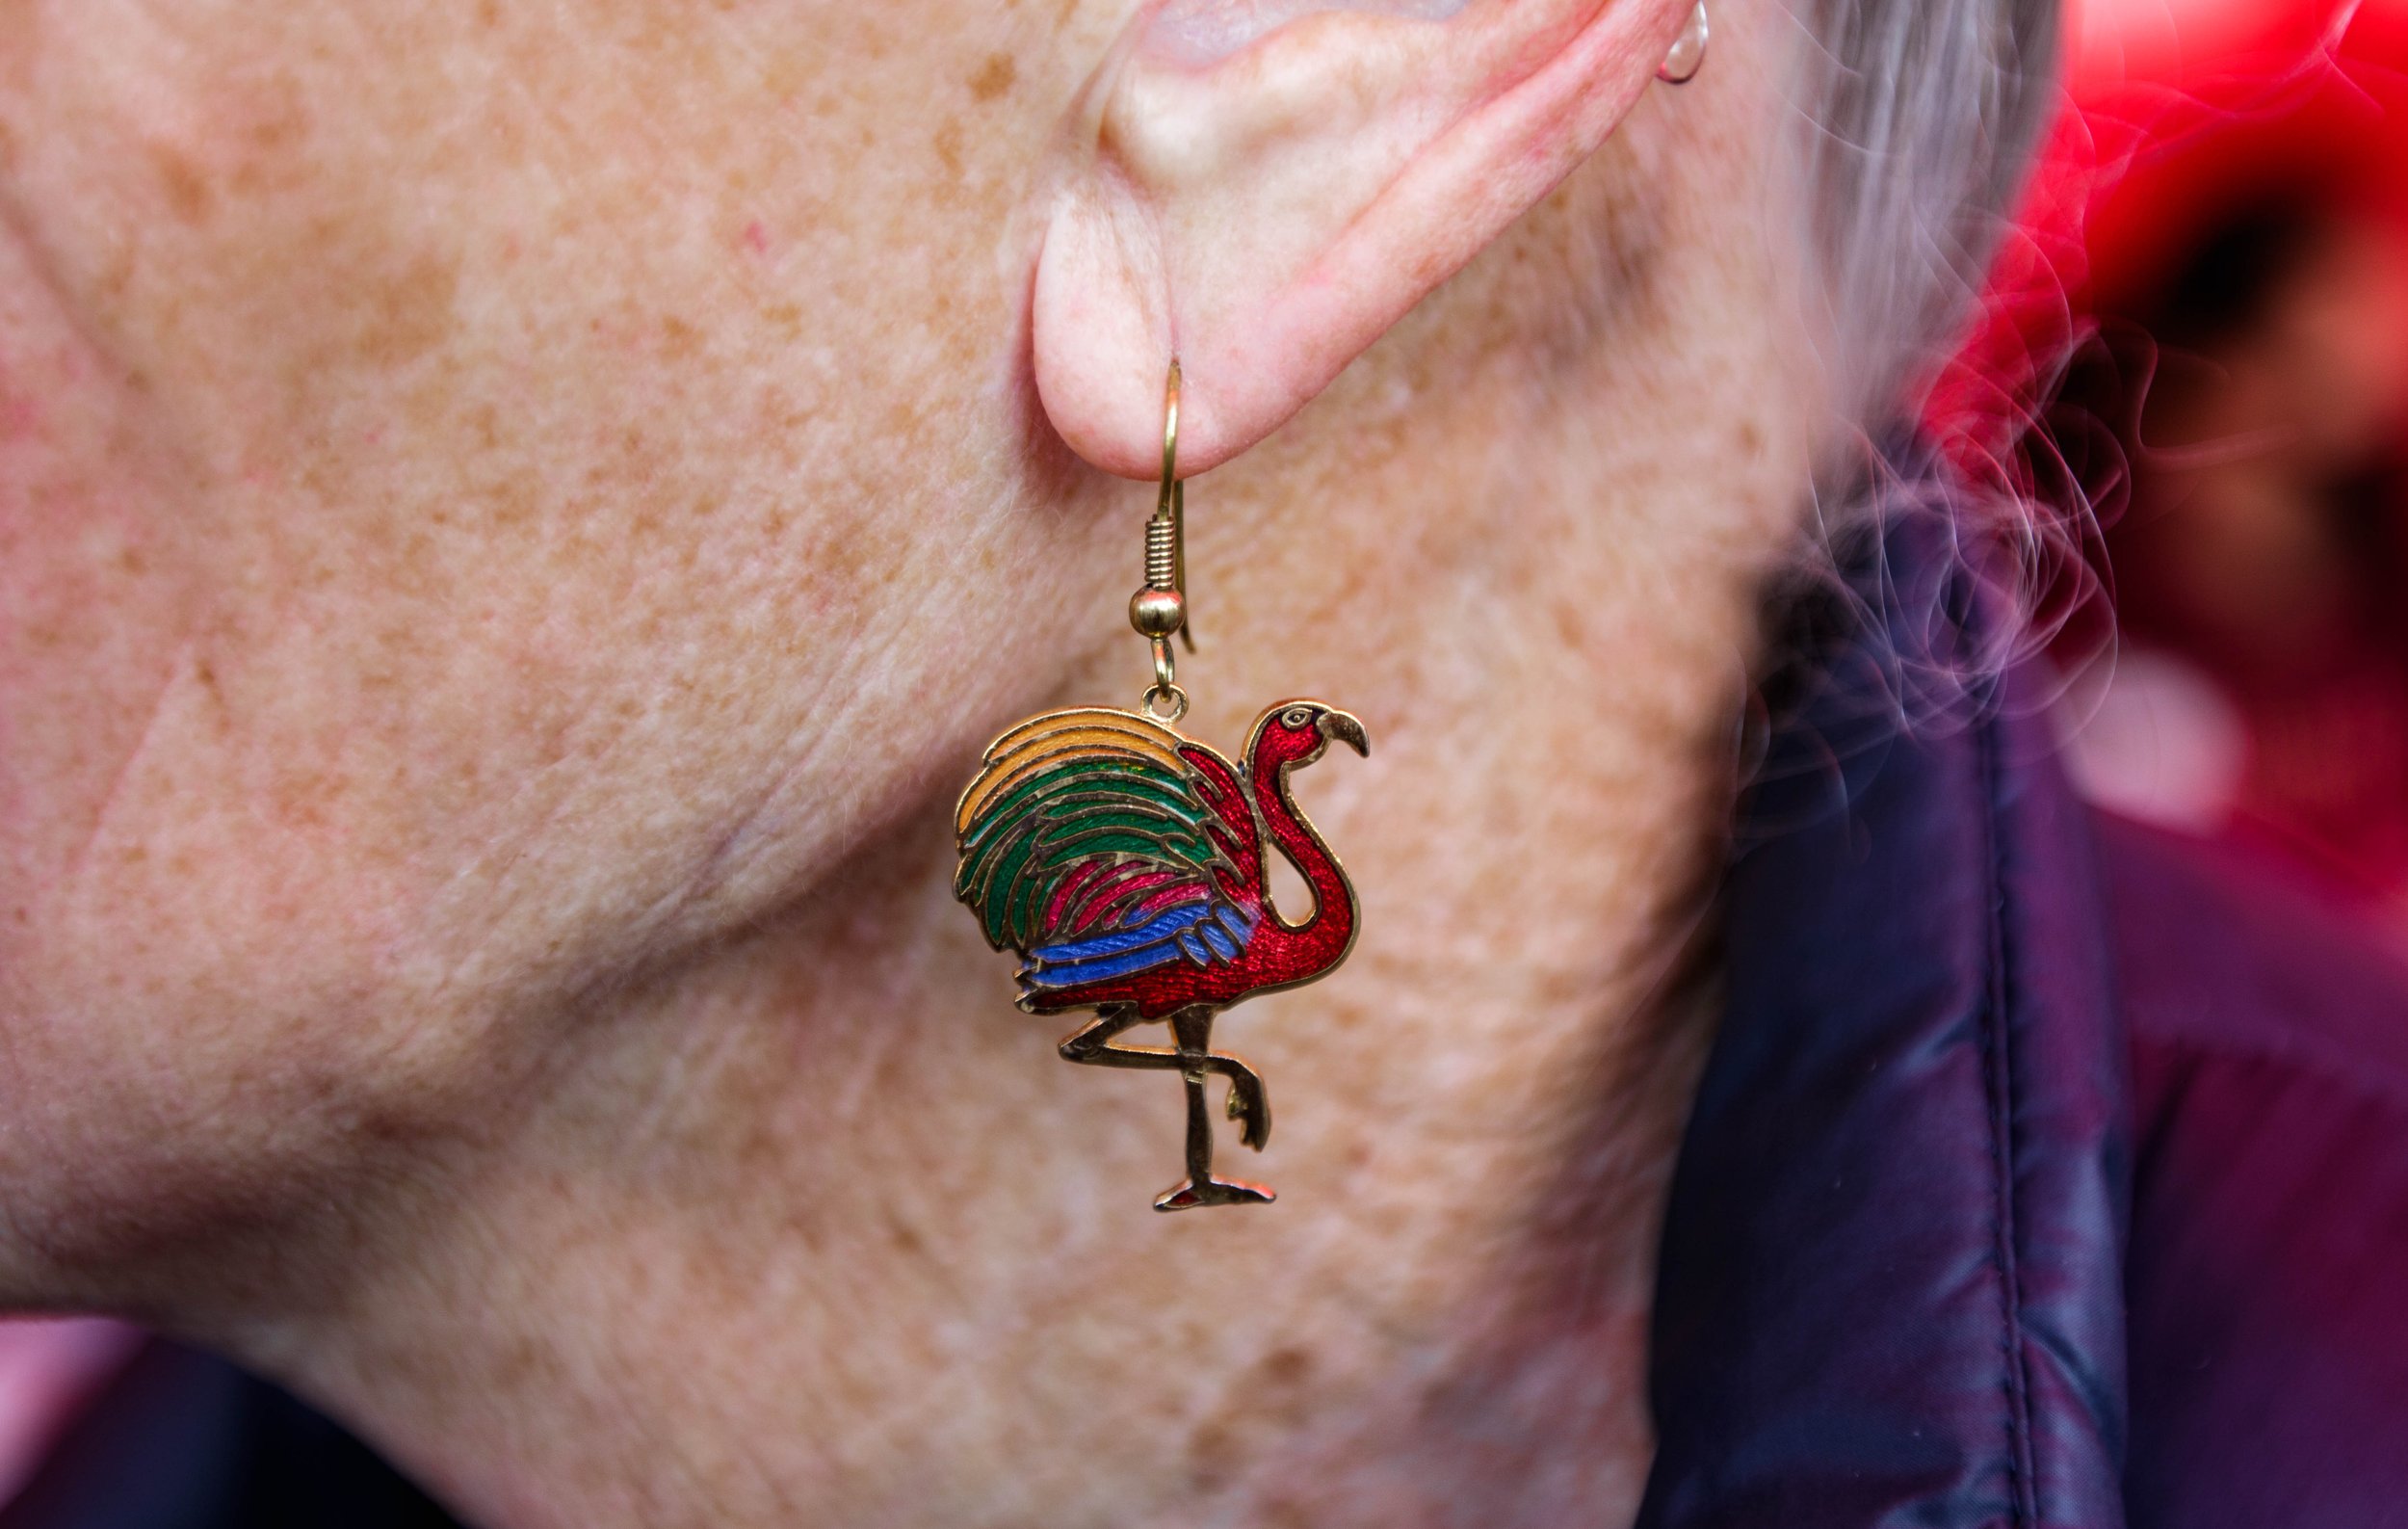  Lost Angels Org volunteer Kathil Adkins wears a turkey earring to the Lost Angels Org annual Thanksgiving event to feed the homeless in Venice. The event has been ongoing for 10 years. Nov. 24, 2022. Venice, Calif. (Ee Lin Tsen | The Corsair) 